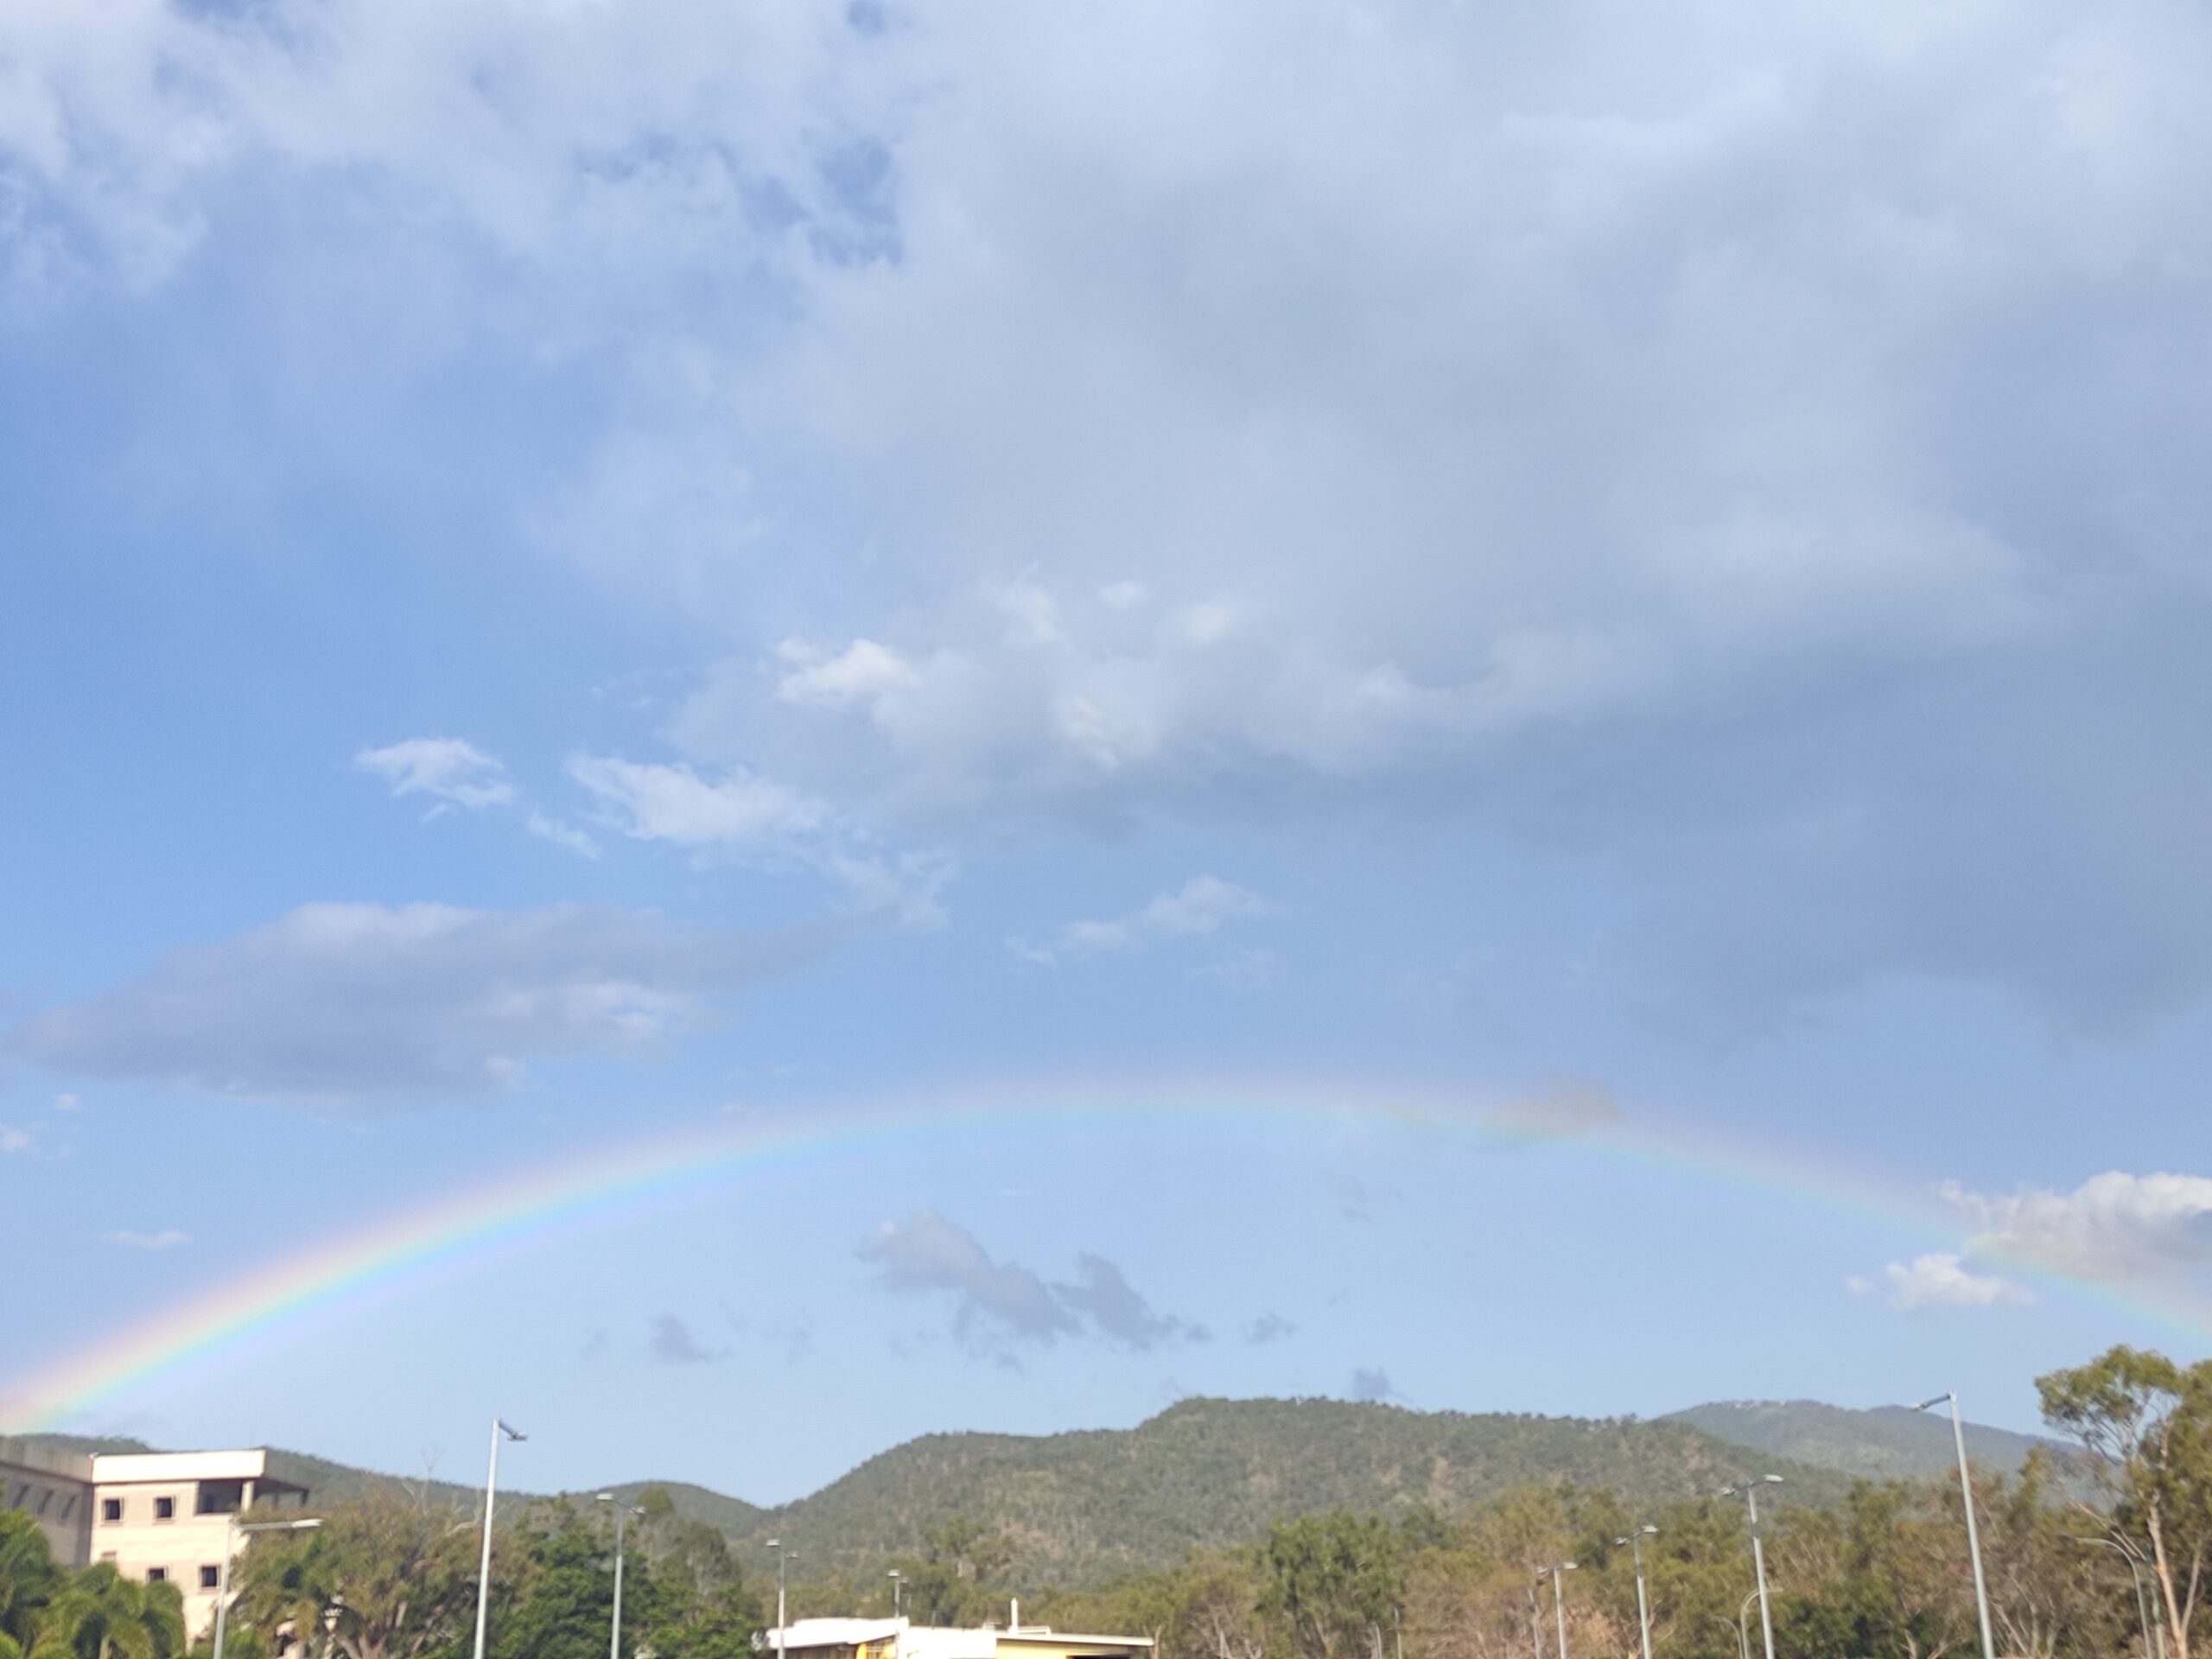 Chasing Rainbows: Another Spring in Yeppoon